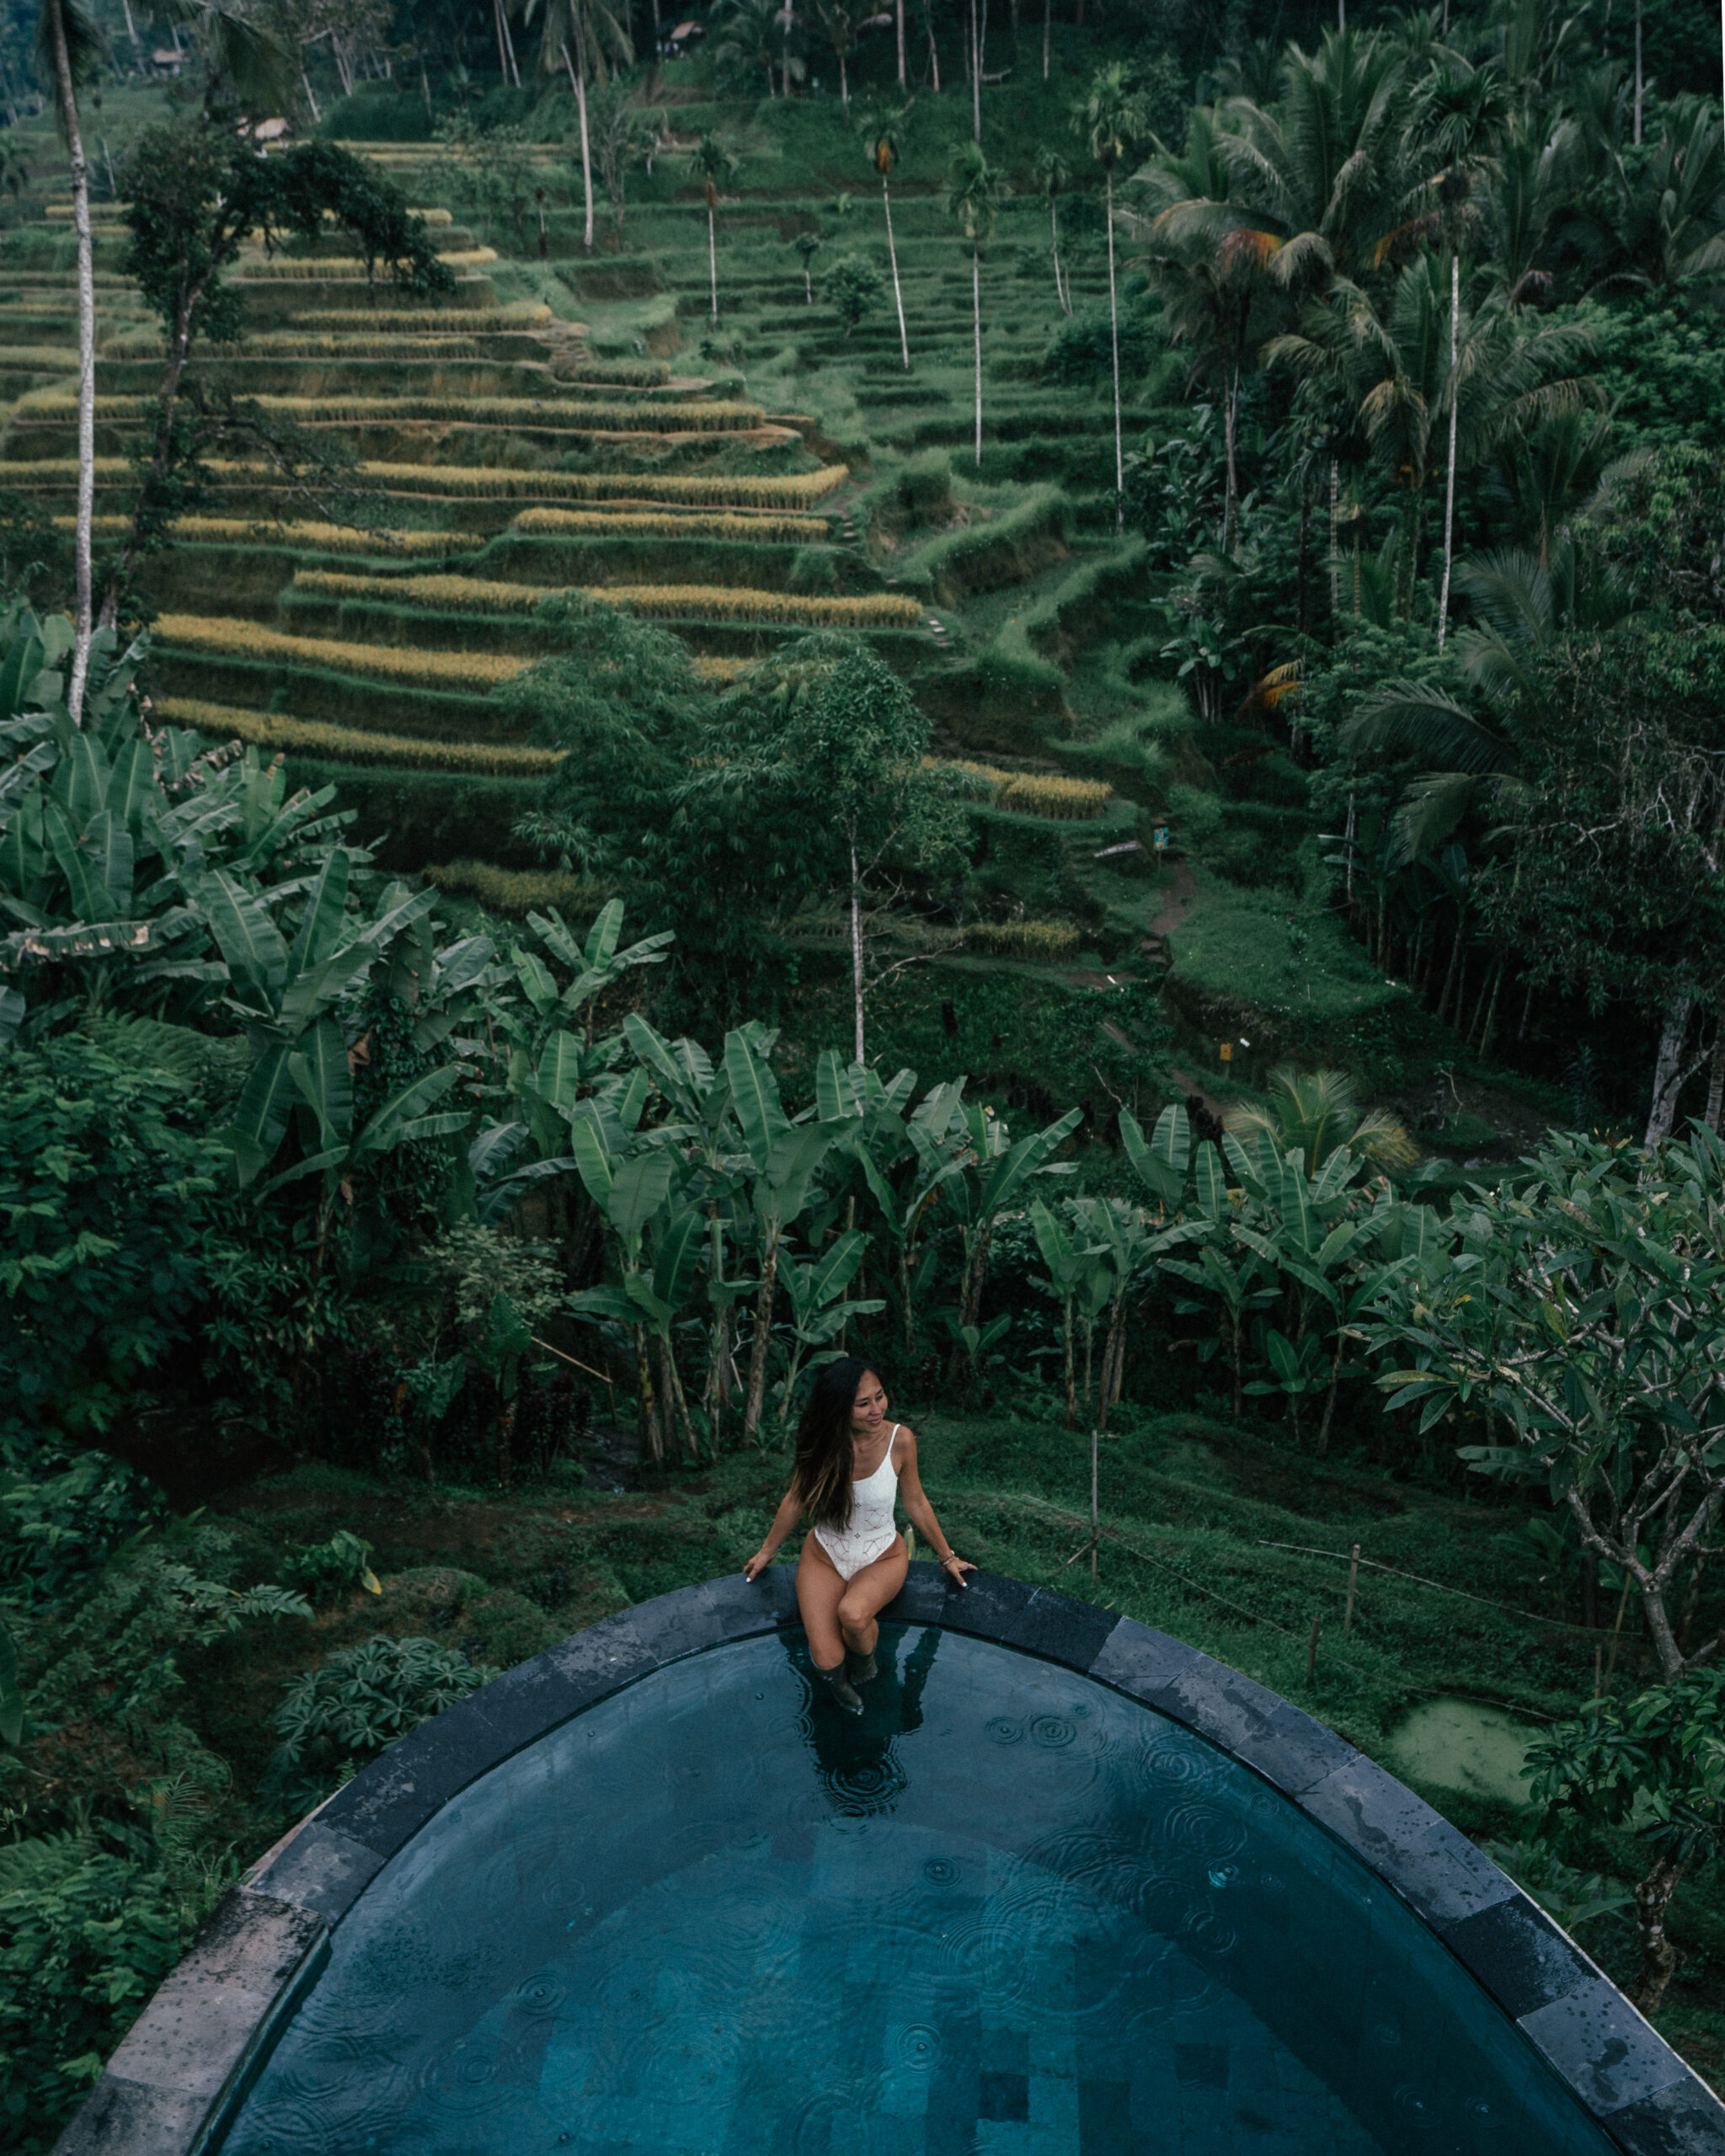 A complete travel guide to Ubud, Bali including the best places to visit, temples, waterfalls, markets, day trips, photo locations, hotels, restaurants, private guides and drivers, as well as a 5-day itinerary.